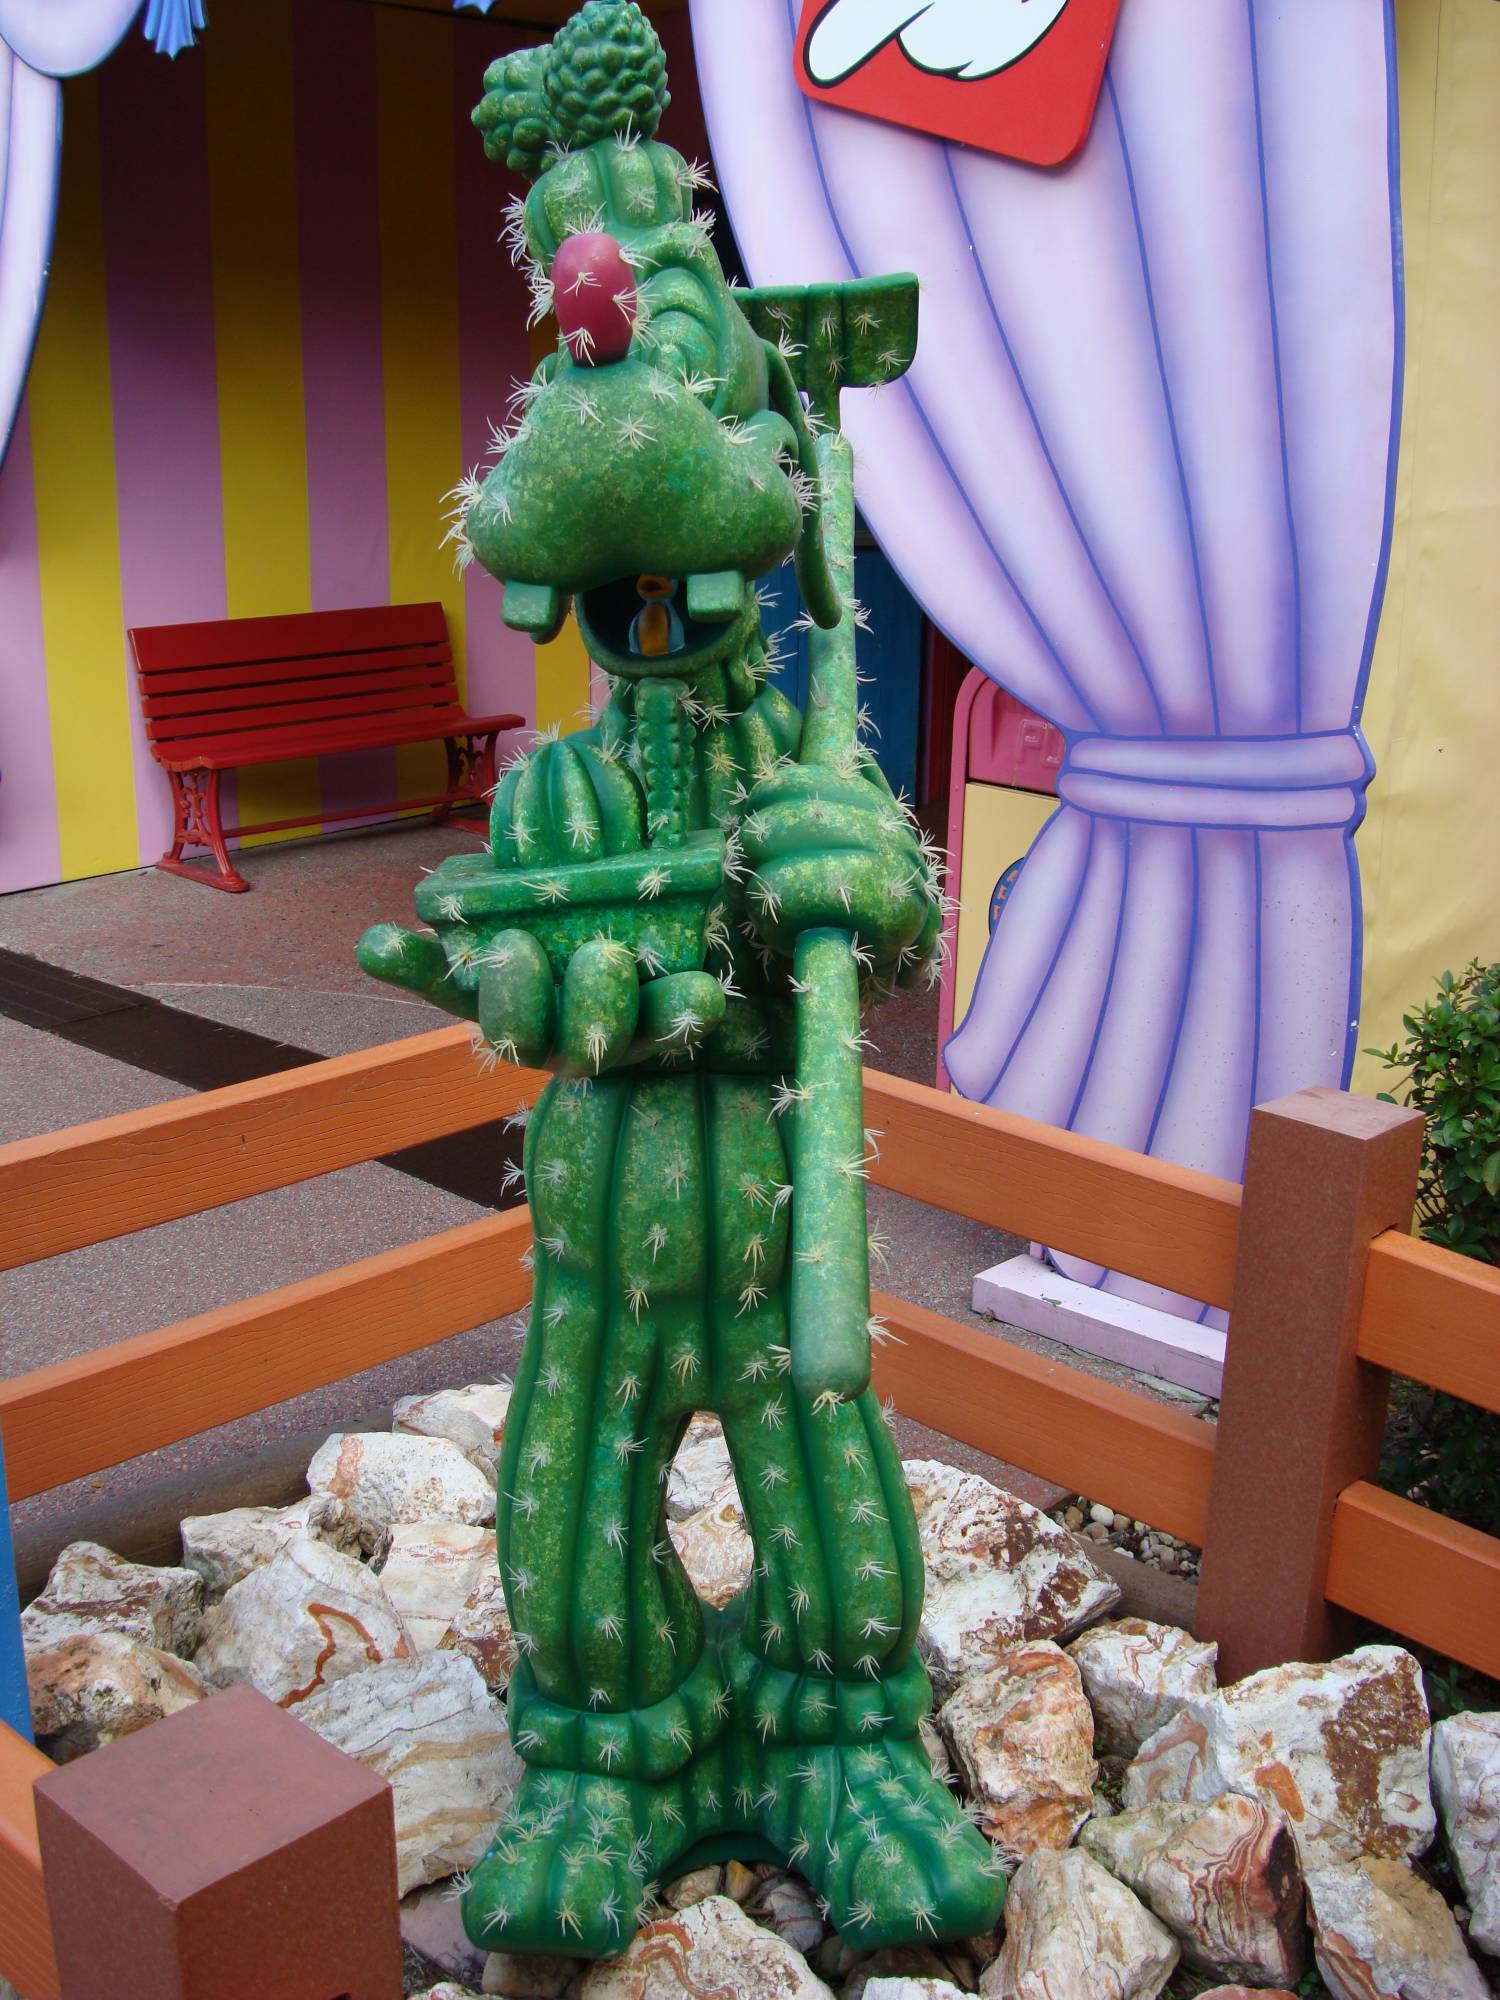 Magic Kingdom - characters in Mickey's House garden